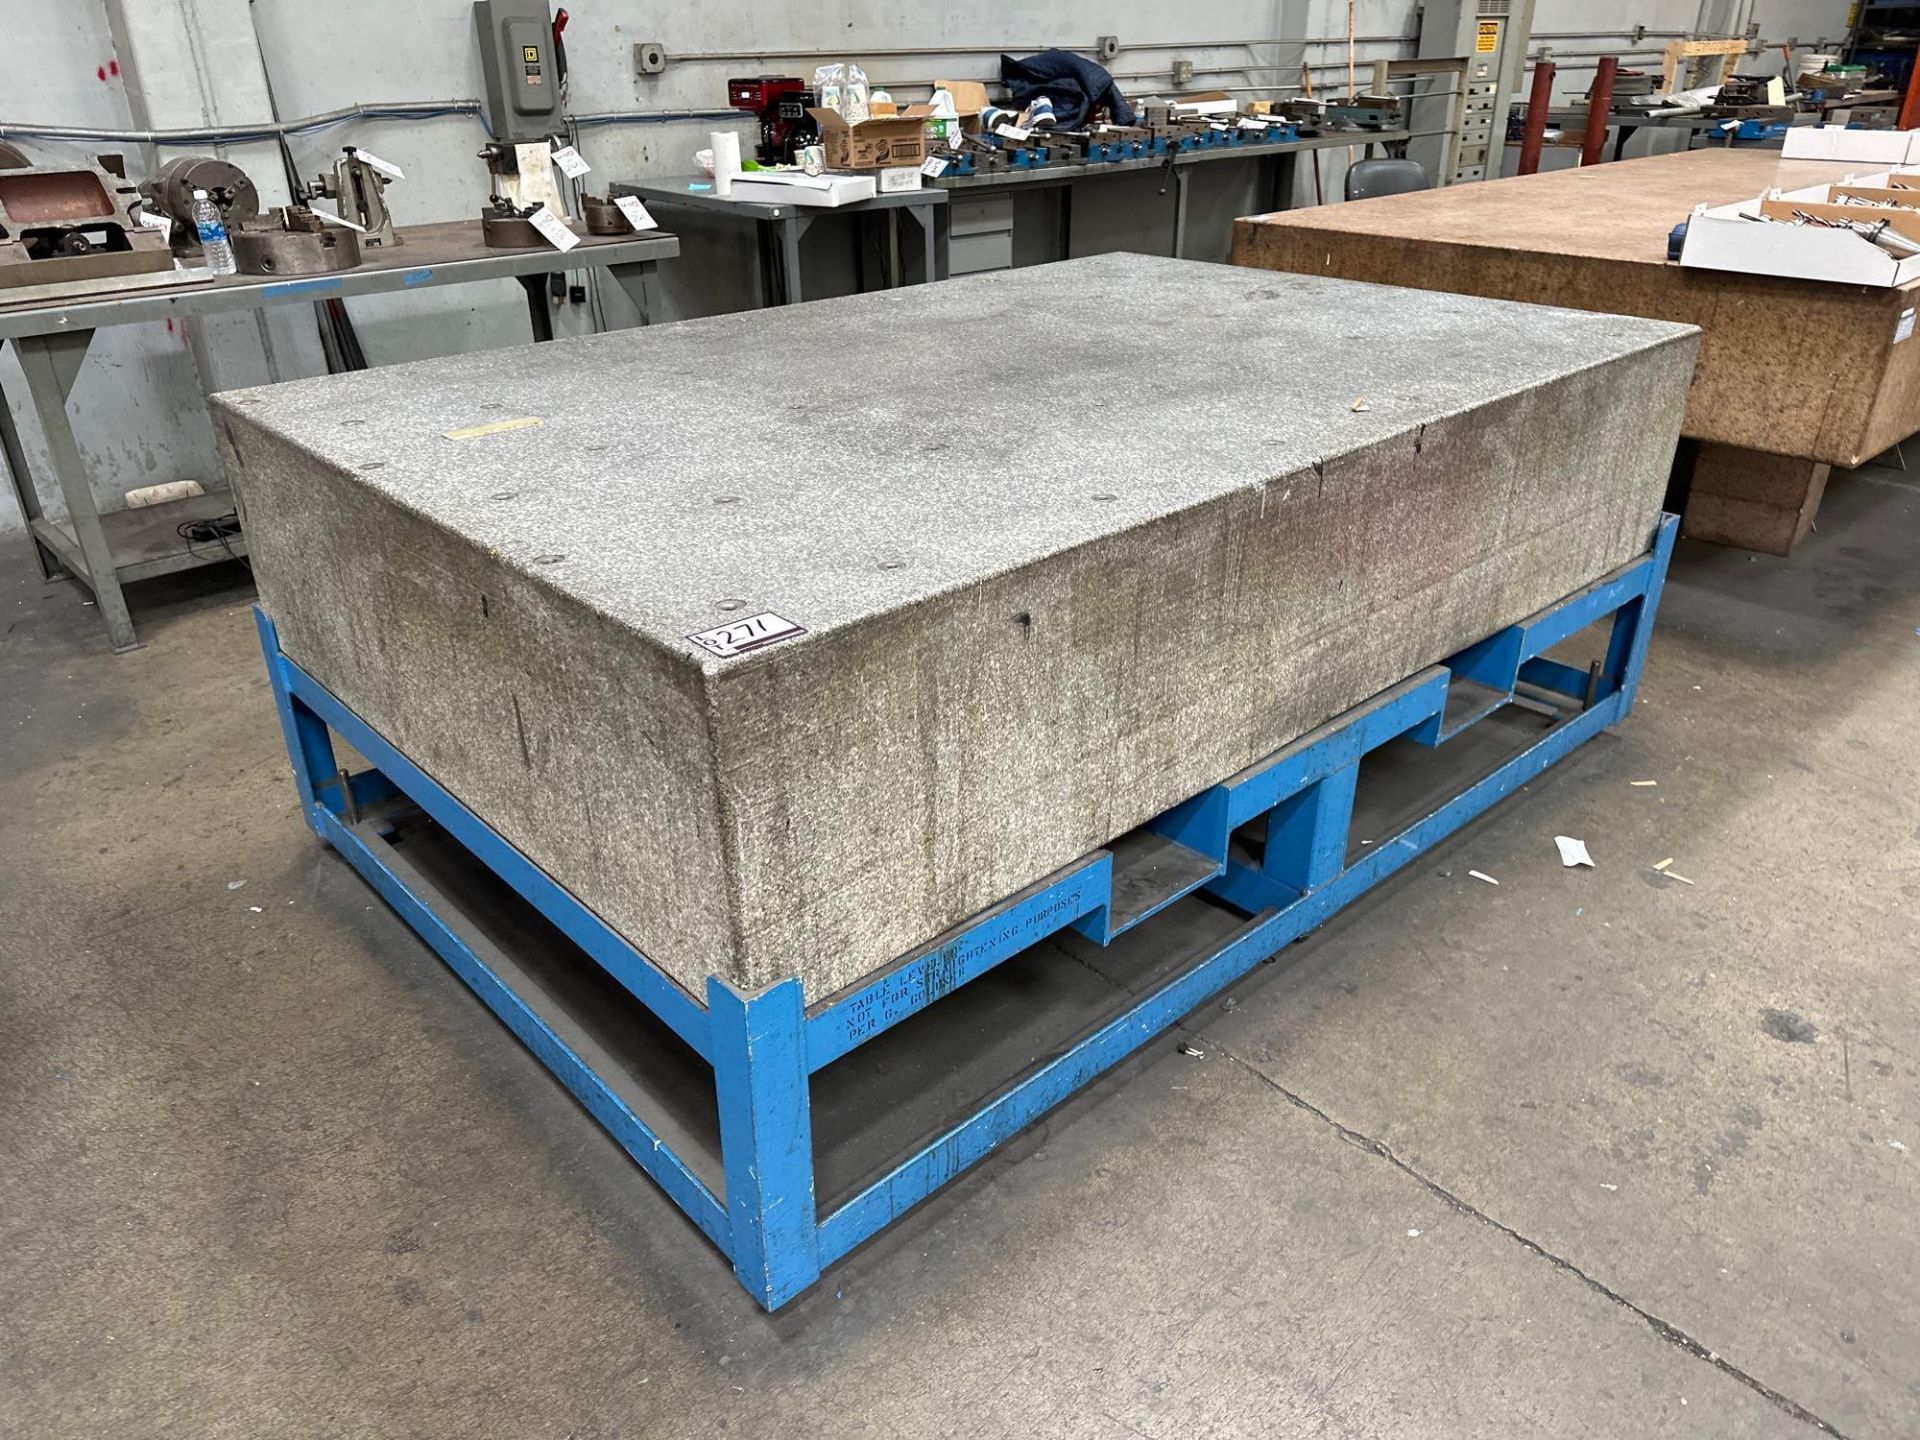 18” x 59” x 90” Granite Surface Plate w/ Steel Stand